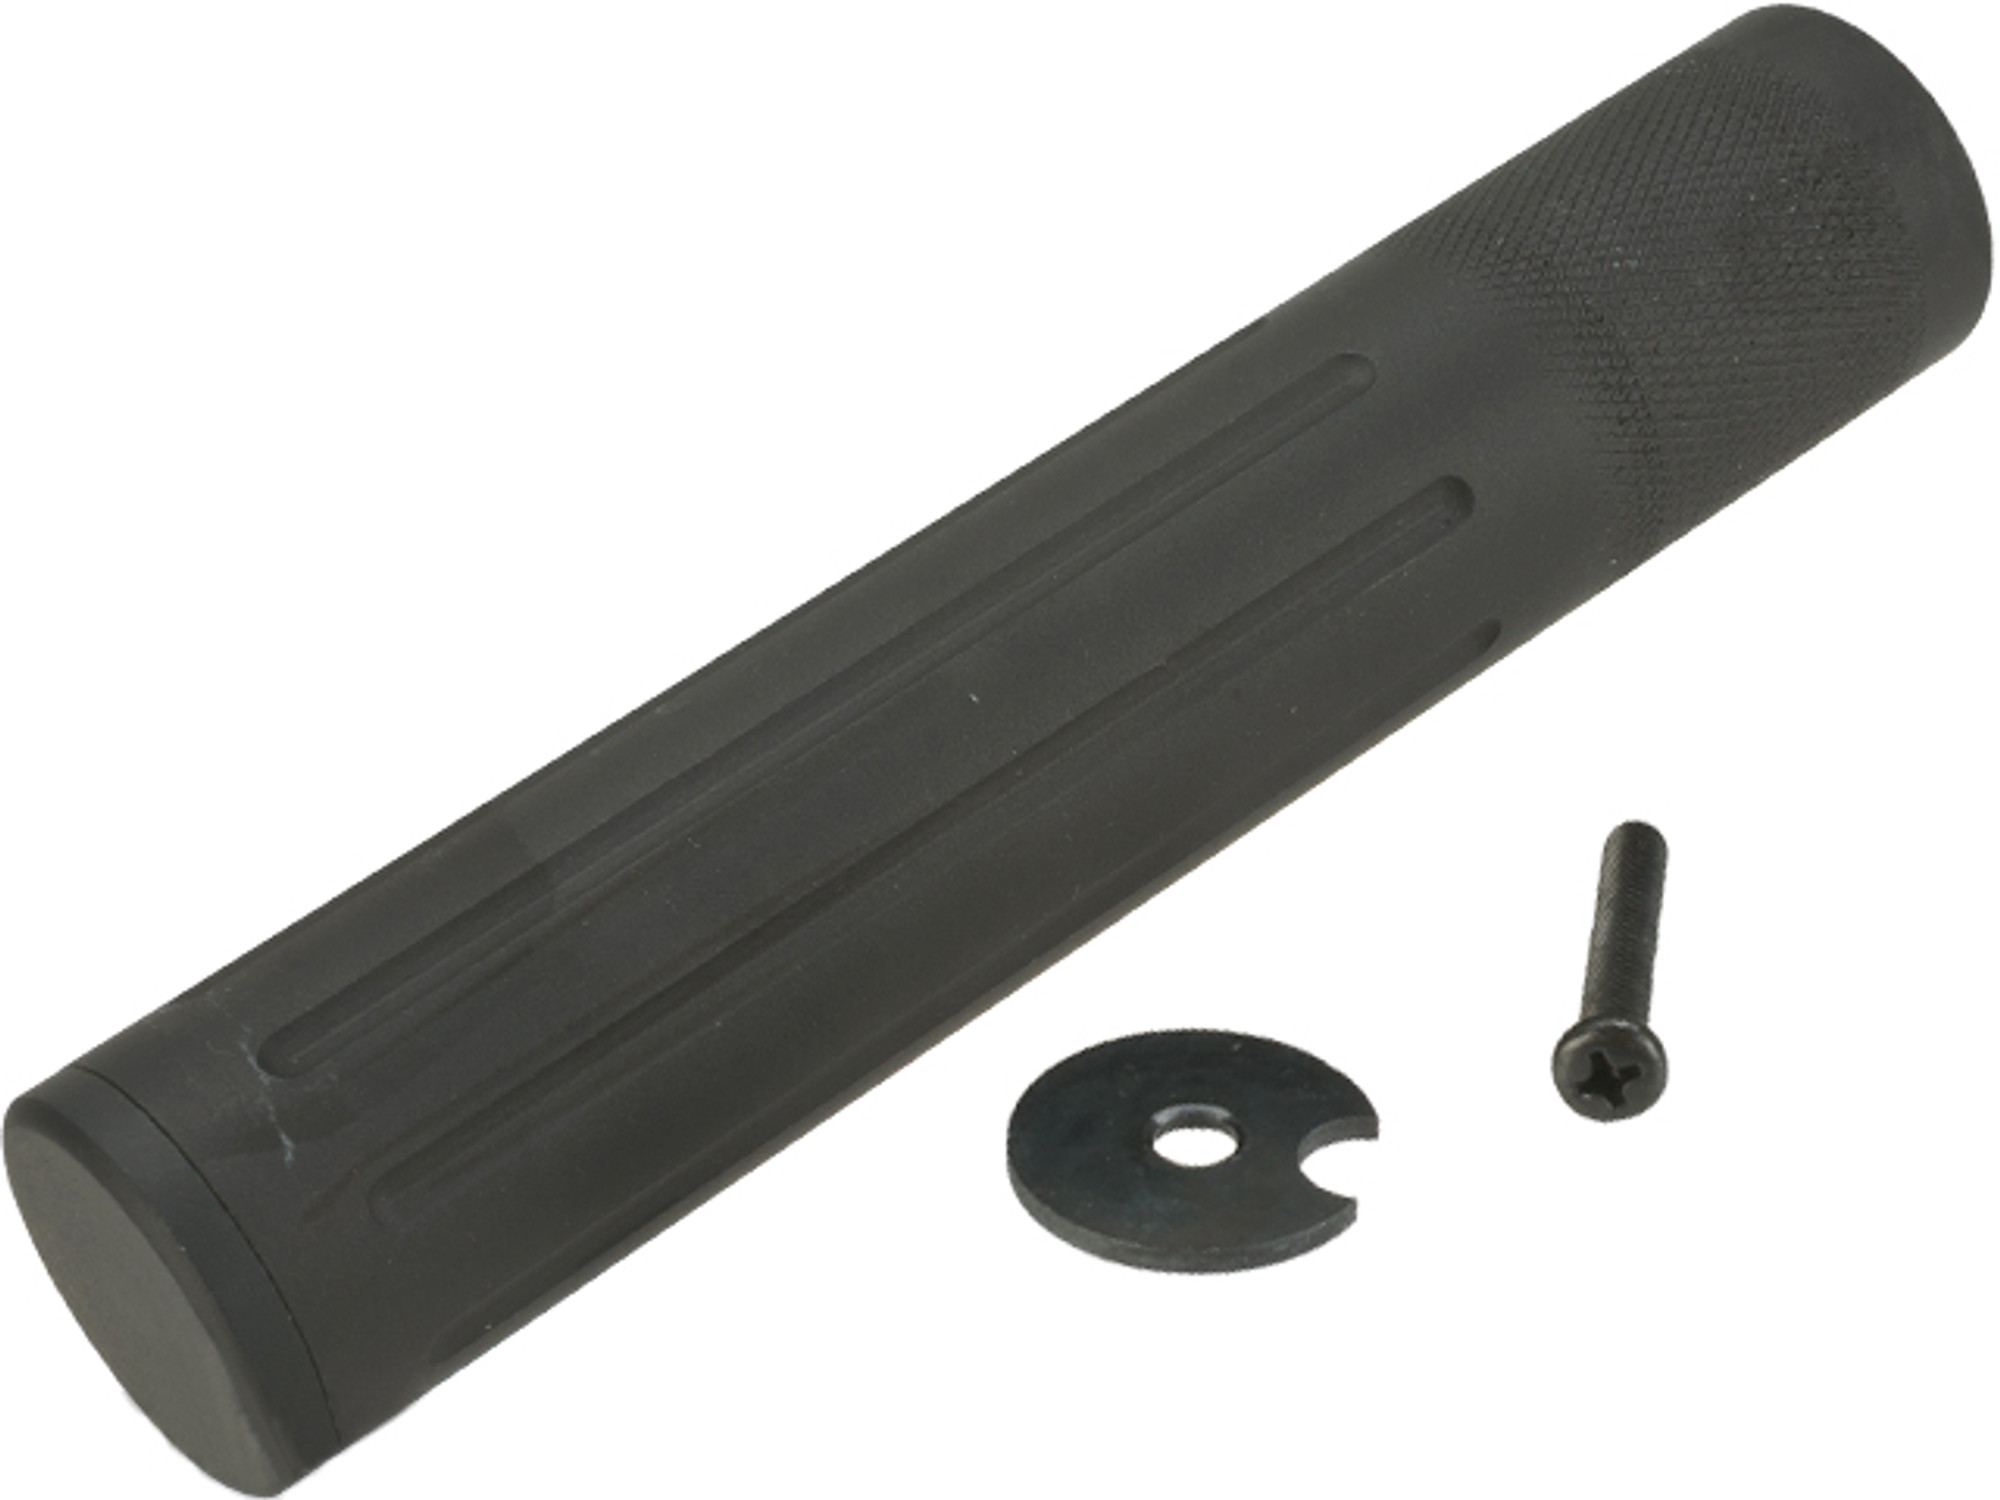 5KU AR Pistol Style Stock Tube for Tokyo Marui M4 Series Airsoft AEGs